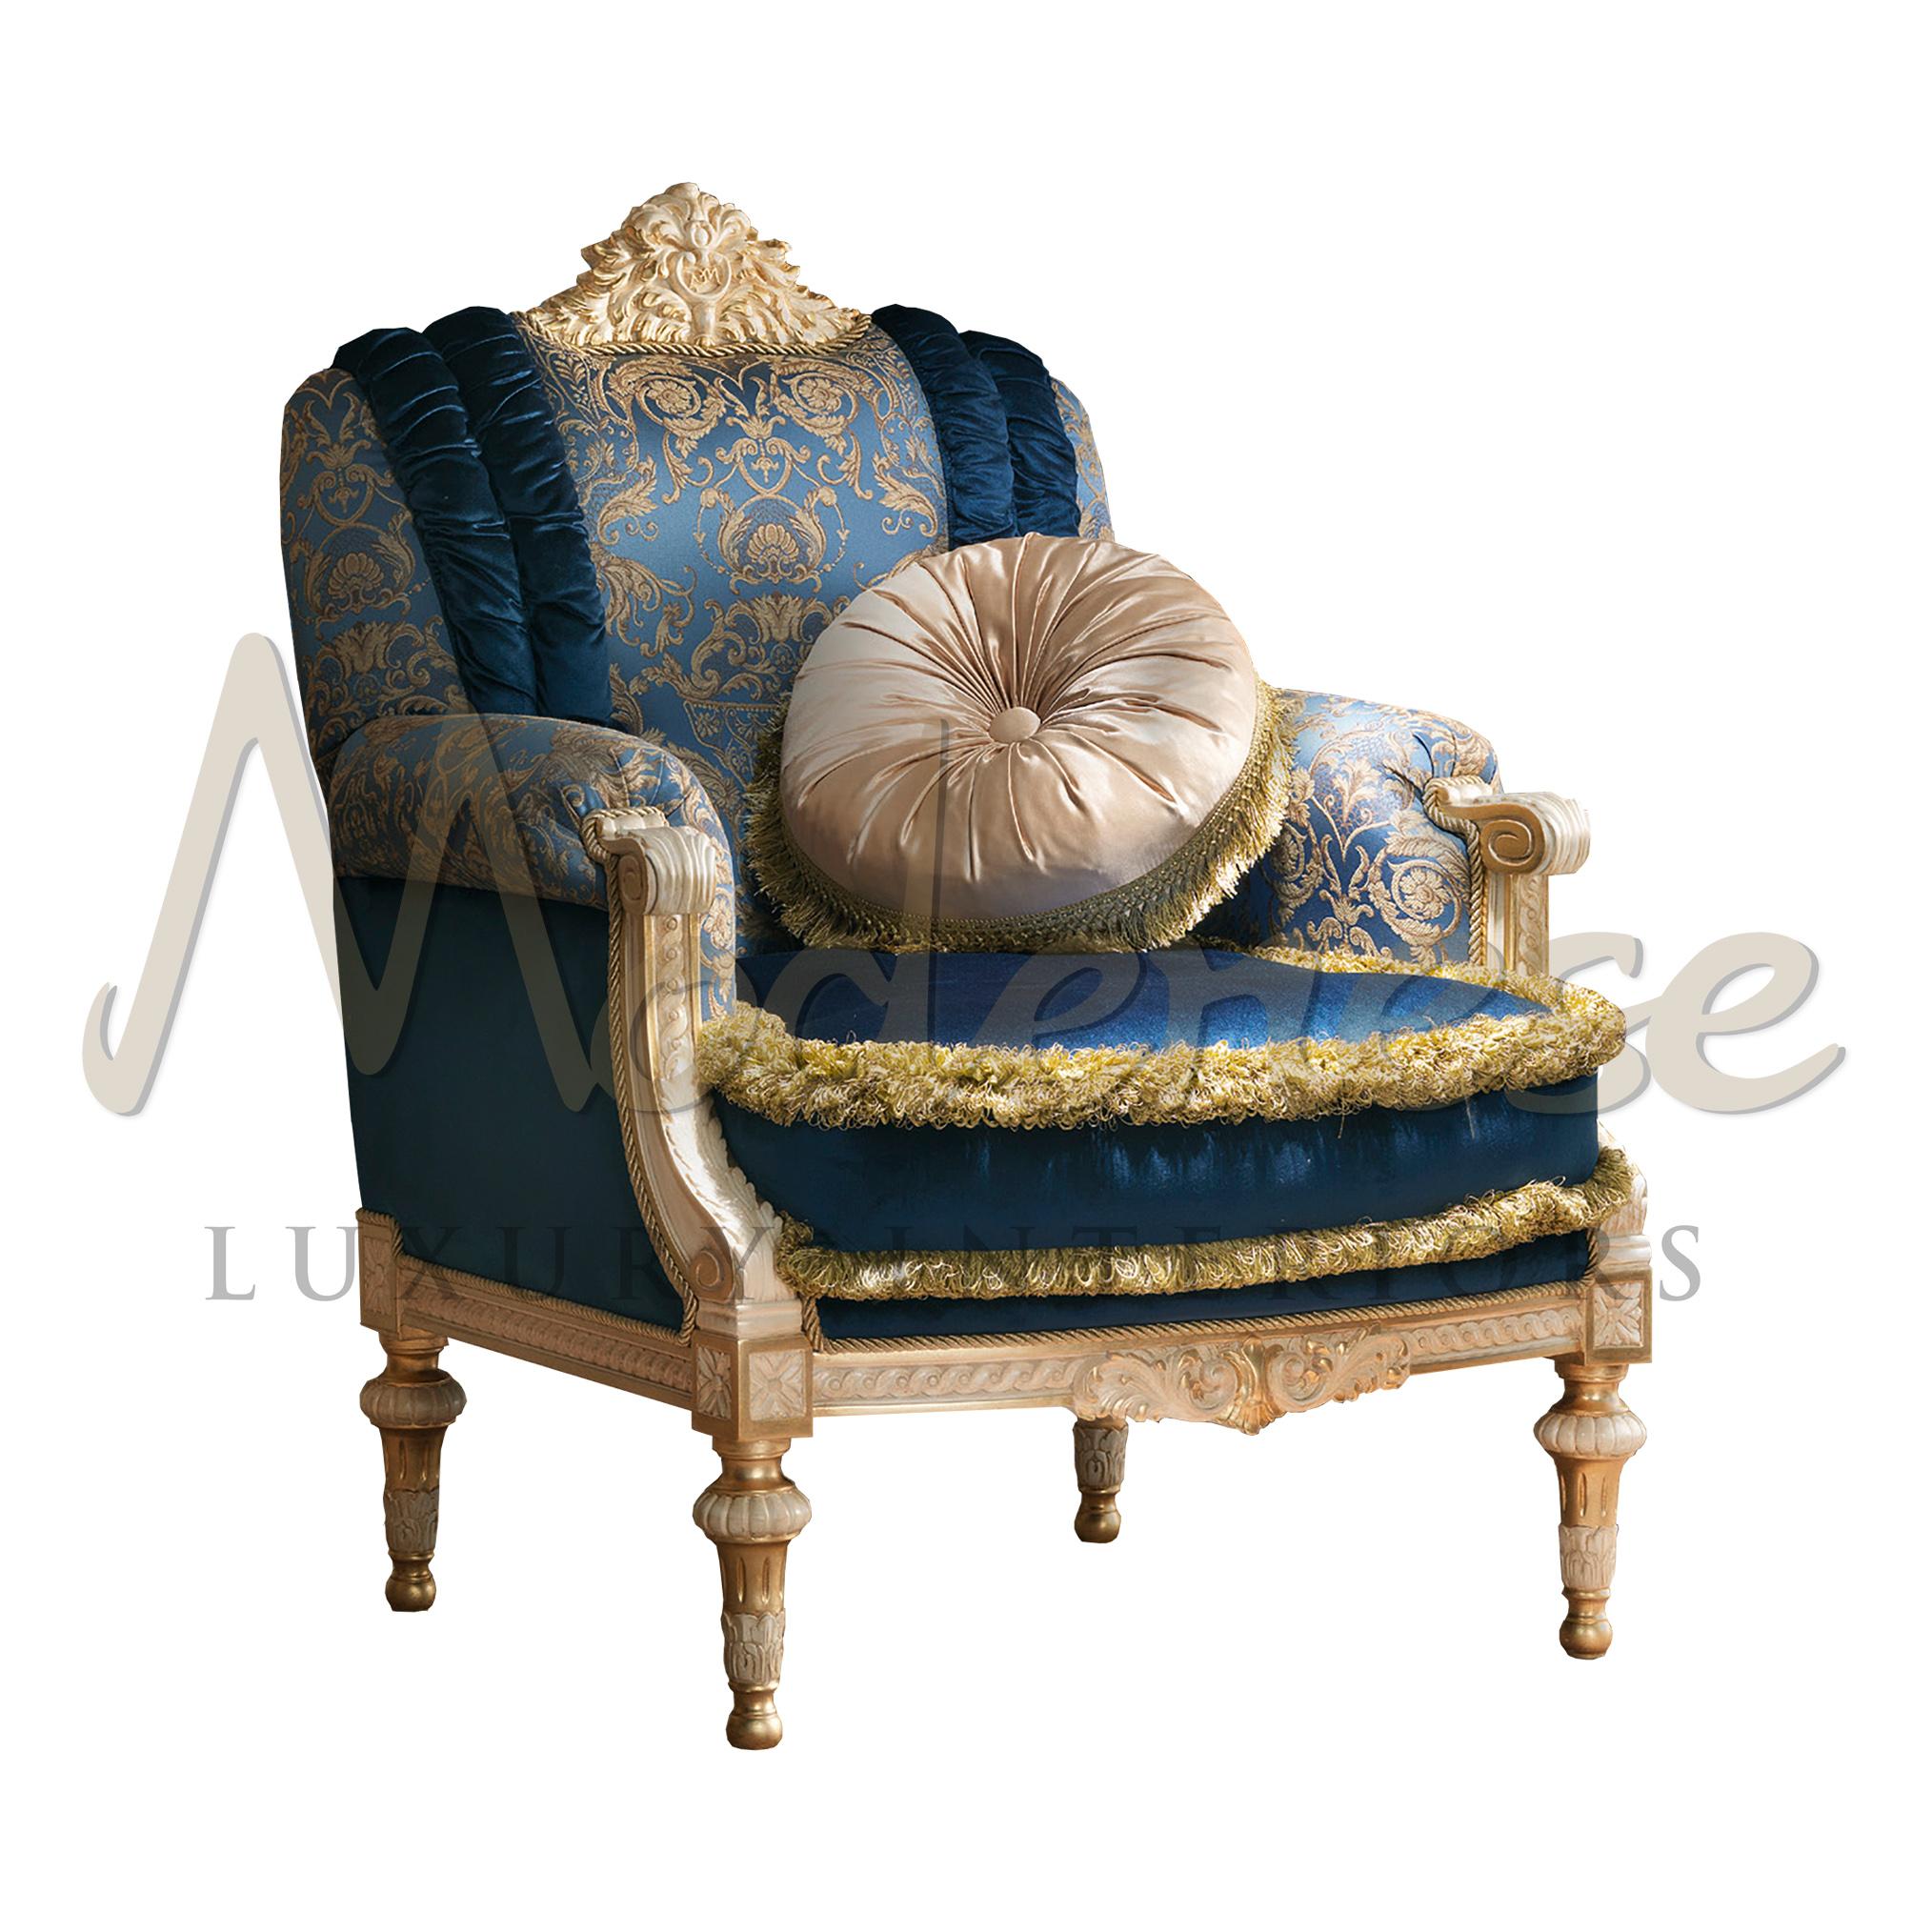 Italian Noble Venetian Armchair in Blue and Gold Fabrics with Pillow For Sale